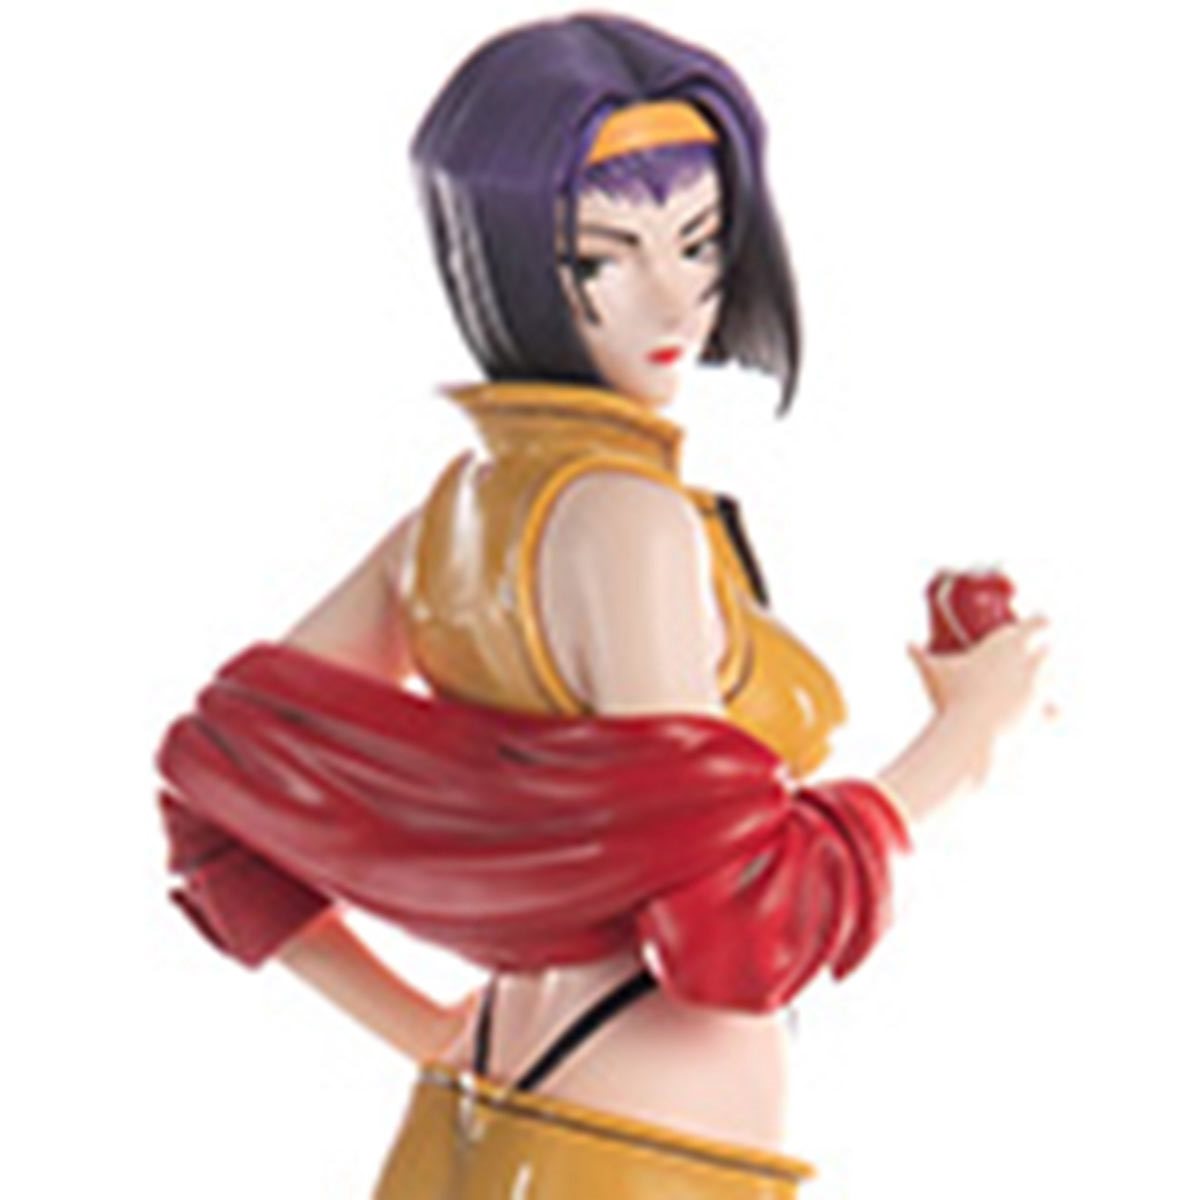 Cowboy Bebop - Faye Valentine 1/8th Scale Figure First 4 Figures Resin